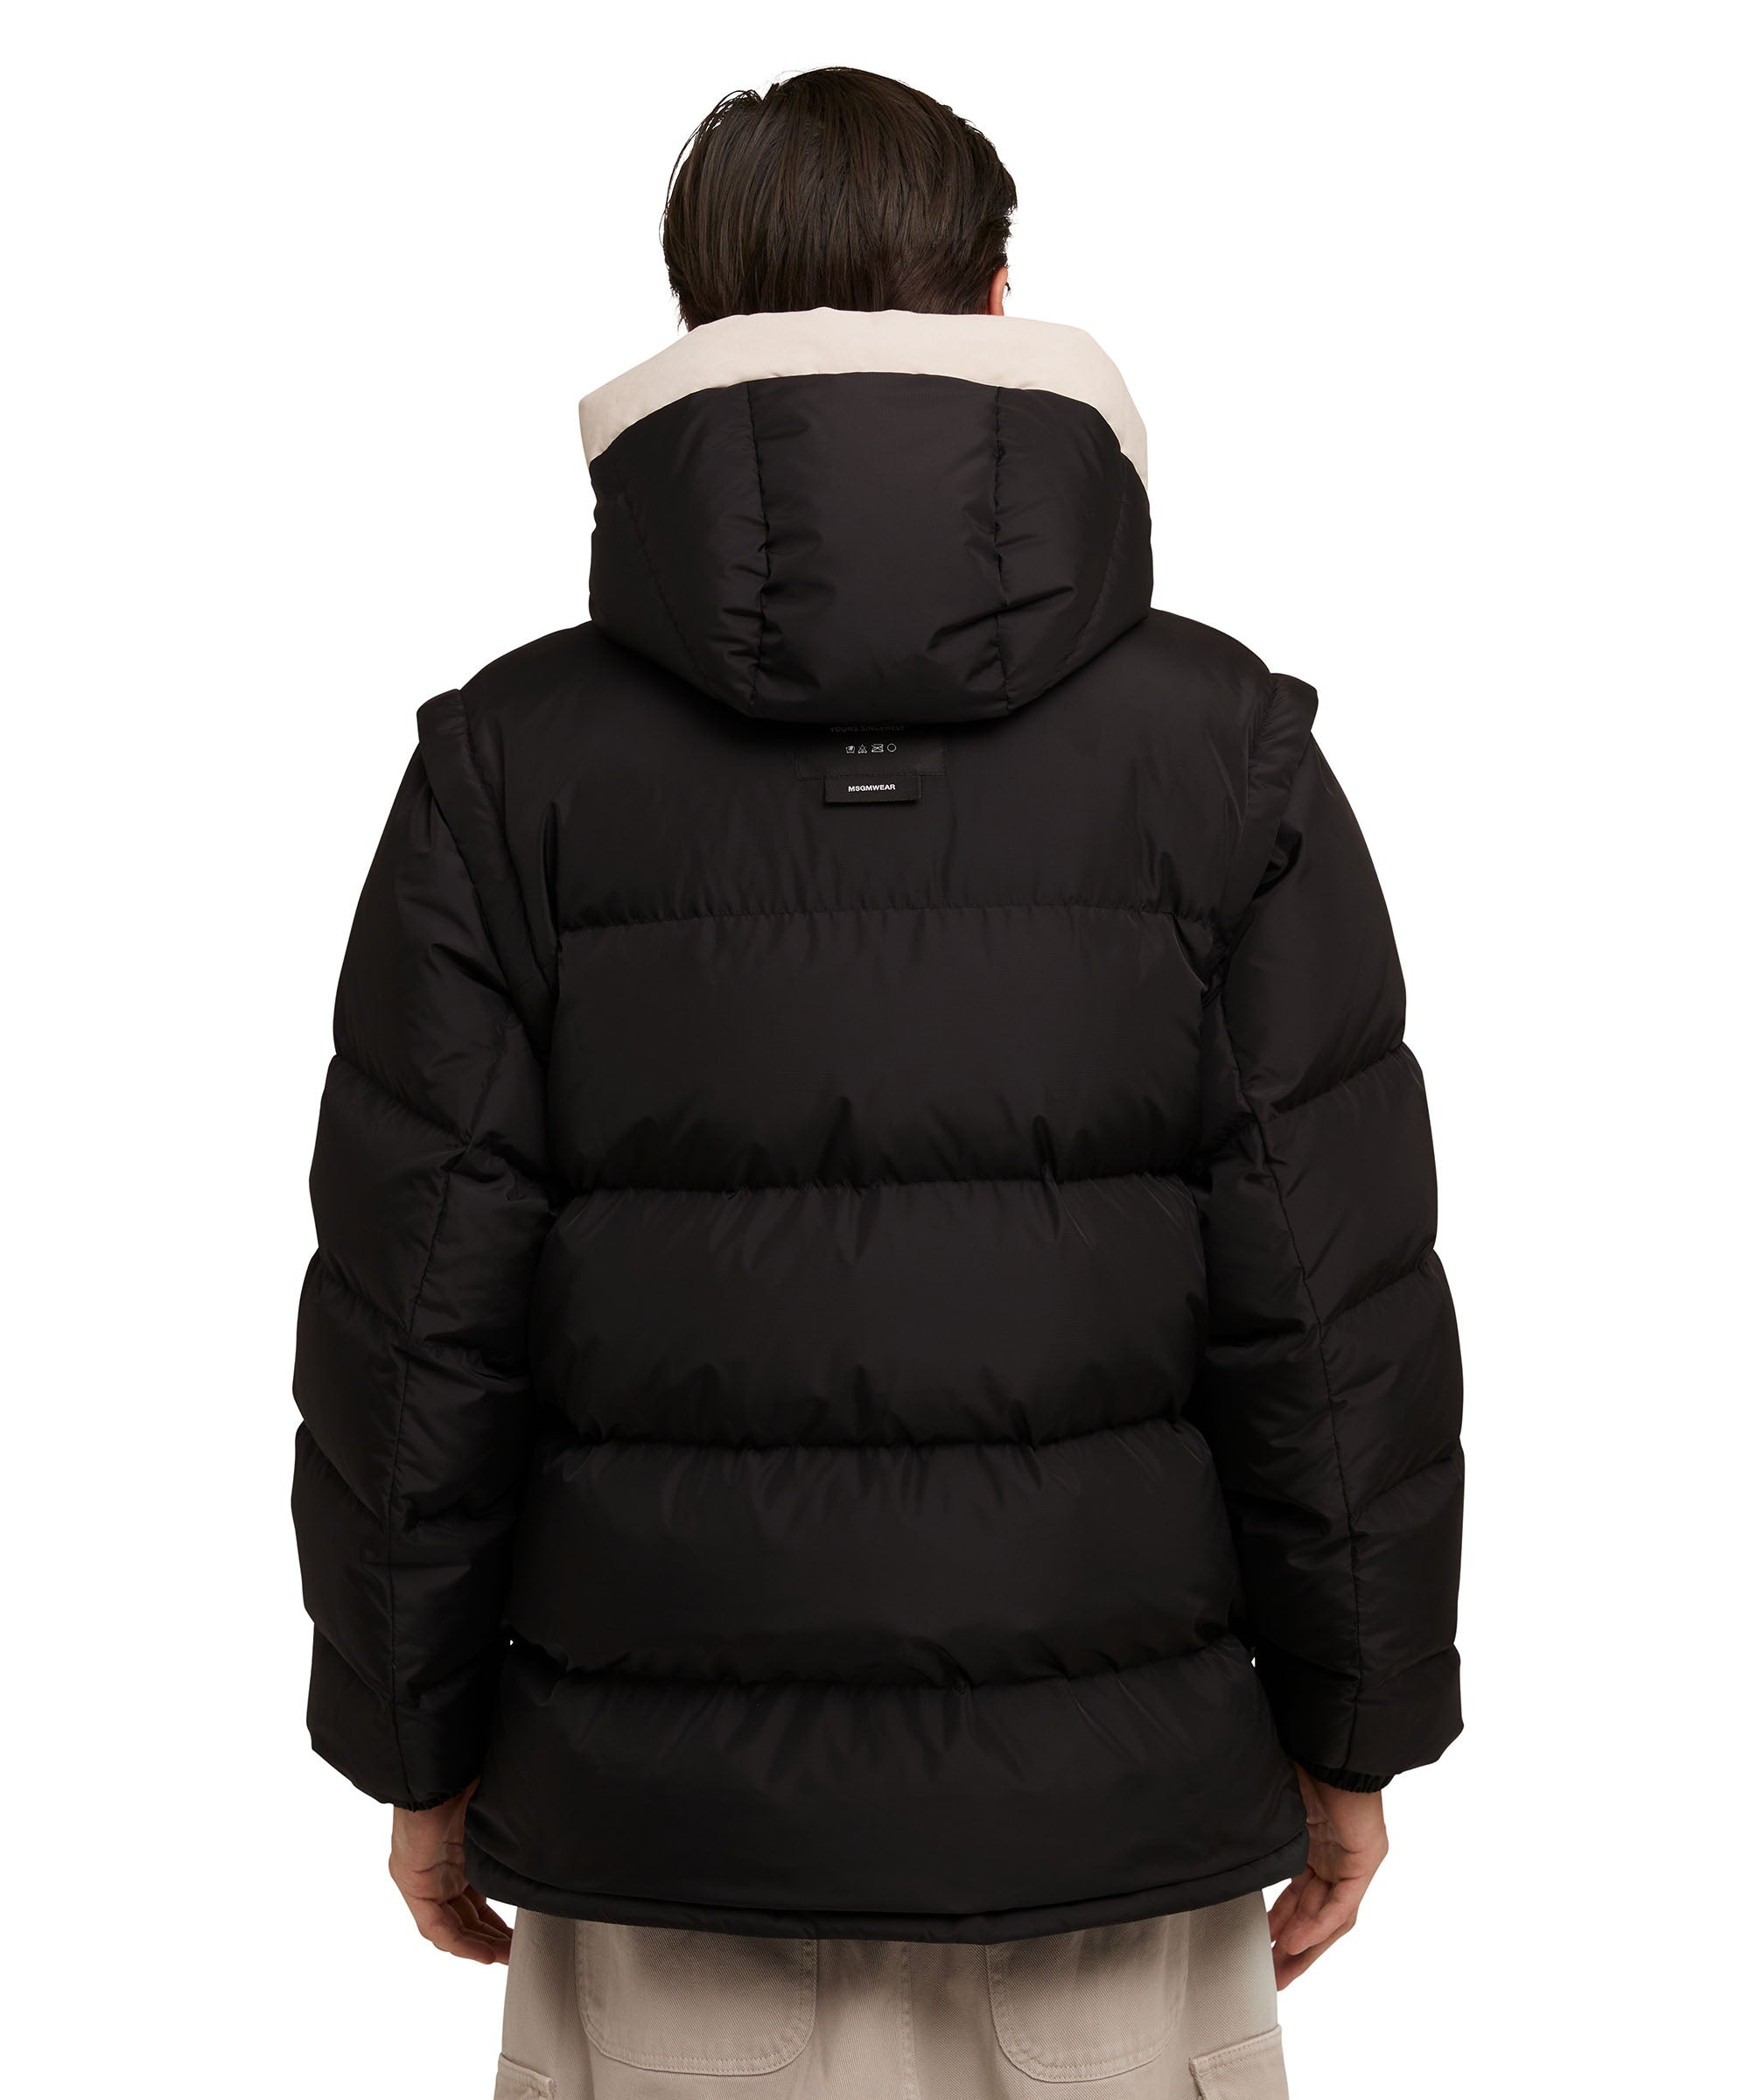 "Micro ripstop" down jacket with micro logo - 3